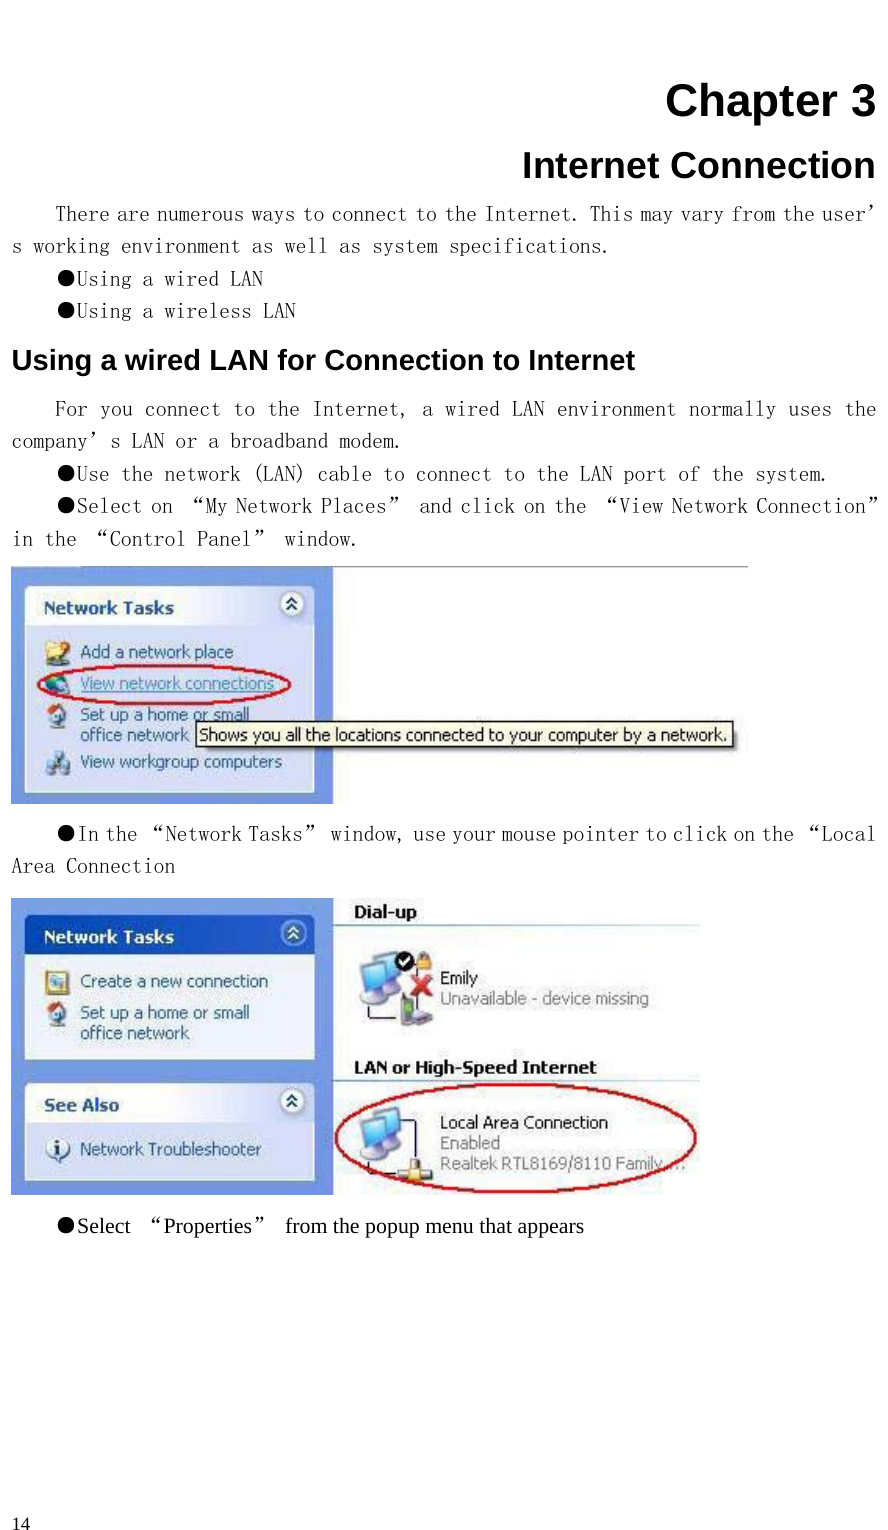   14  Chapter 3 Internet Connection There are numerous ways to connect to the Internet. This may vary from the user’s working environment as well as system specifications. ●Using a wired LAN ●Using a wireless LAN Using a wired LAN for Connection to Internet For you connect to the Internet, a wired LAN environment normally uses the company’s LAN or a broadband modem. ●Use the network (LAN) cable to connect to the LAN port of the system. ●Select on “My Network Places” and click on the “View Network Connection” in the “Control Panel” window.  ●In the “Network Tasks” window, use your mouse pointer to click on the “Local Area Connection   ●Select  “Properties”  from the popup menu that appears 